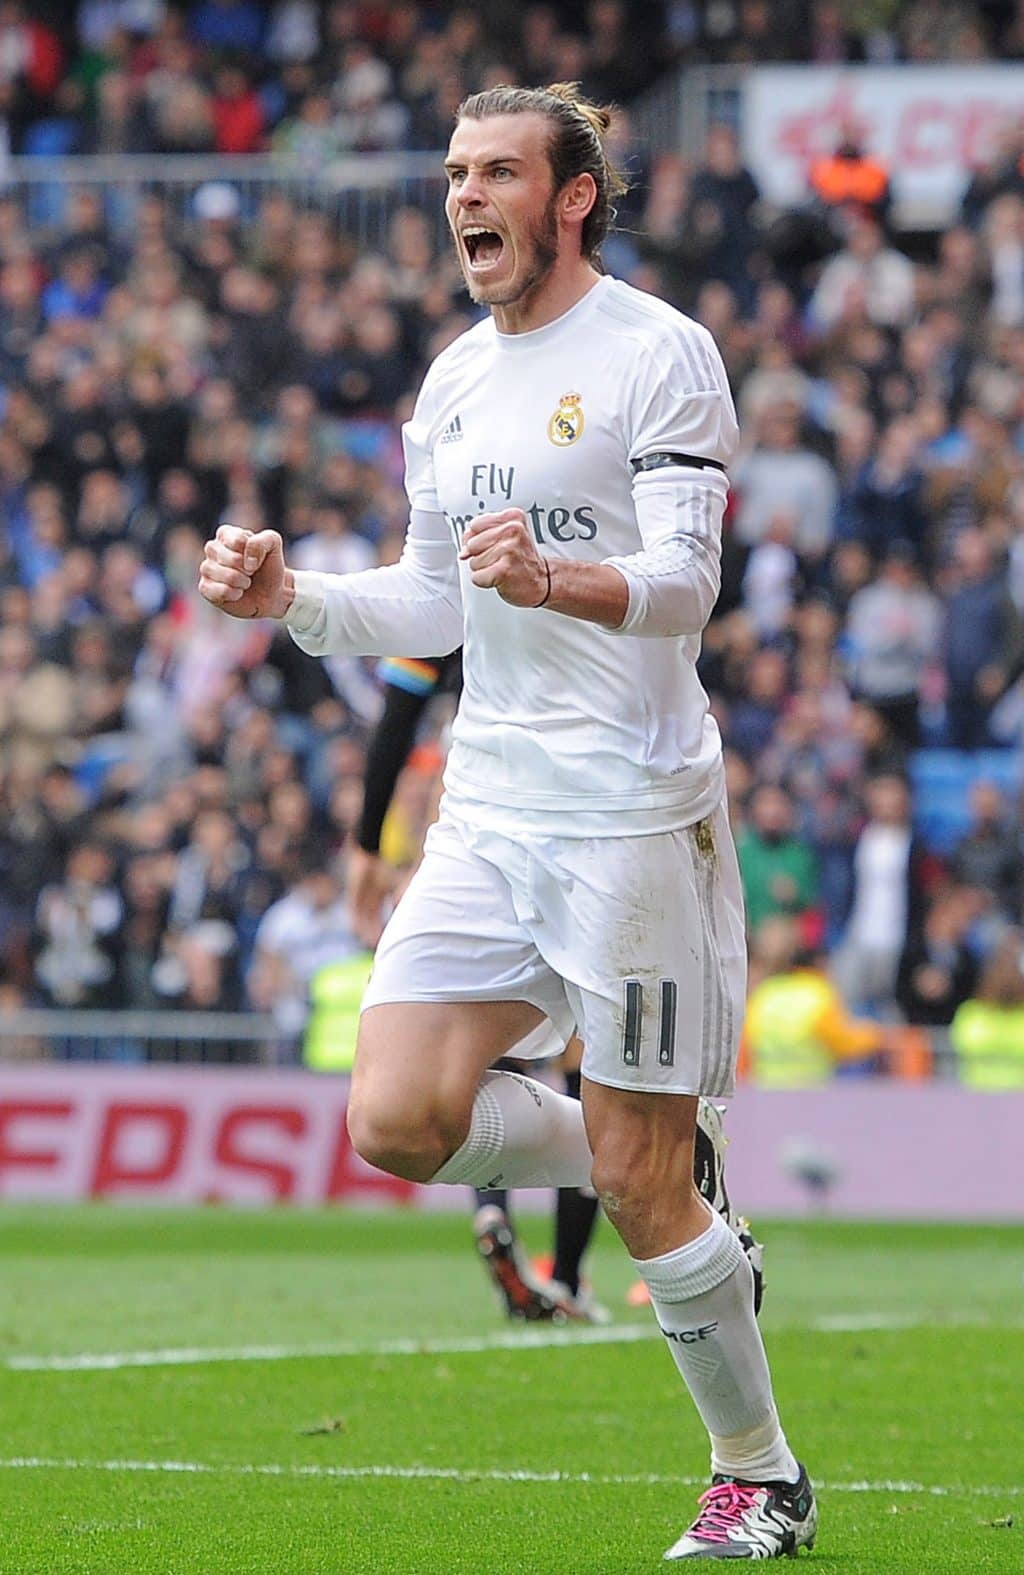 MADRID, SPAIN - DECEMBER 20: (EDITORS NOTE: Retransmission of image #502080034 with alternate crop.) Gareth Bale of Real Madrid celebrates after scoring his team's 2nd goal during the La Liga match between Real Madrid and Rayo Vallecano at estadio Santiago Bernabeu on December 20, 2015 in Madrid, Spain. (Photo by Denis Doyle/Getty Images)